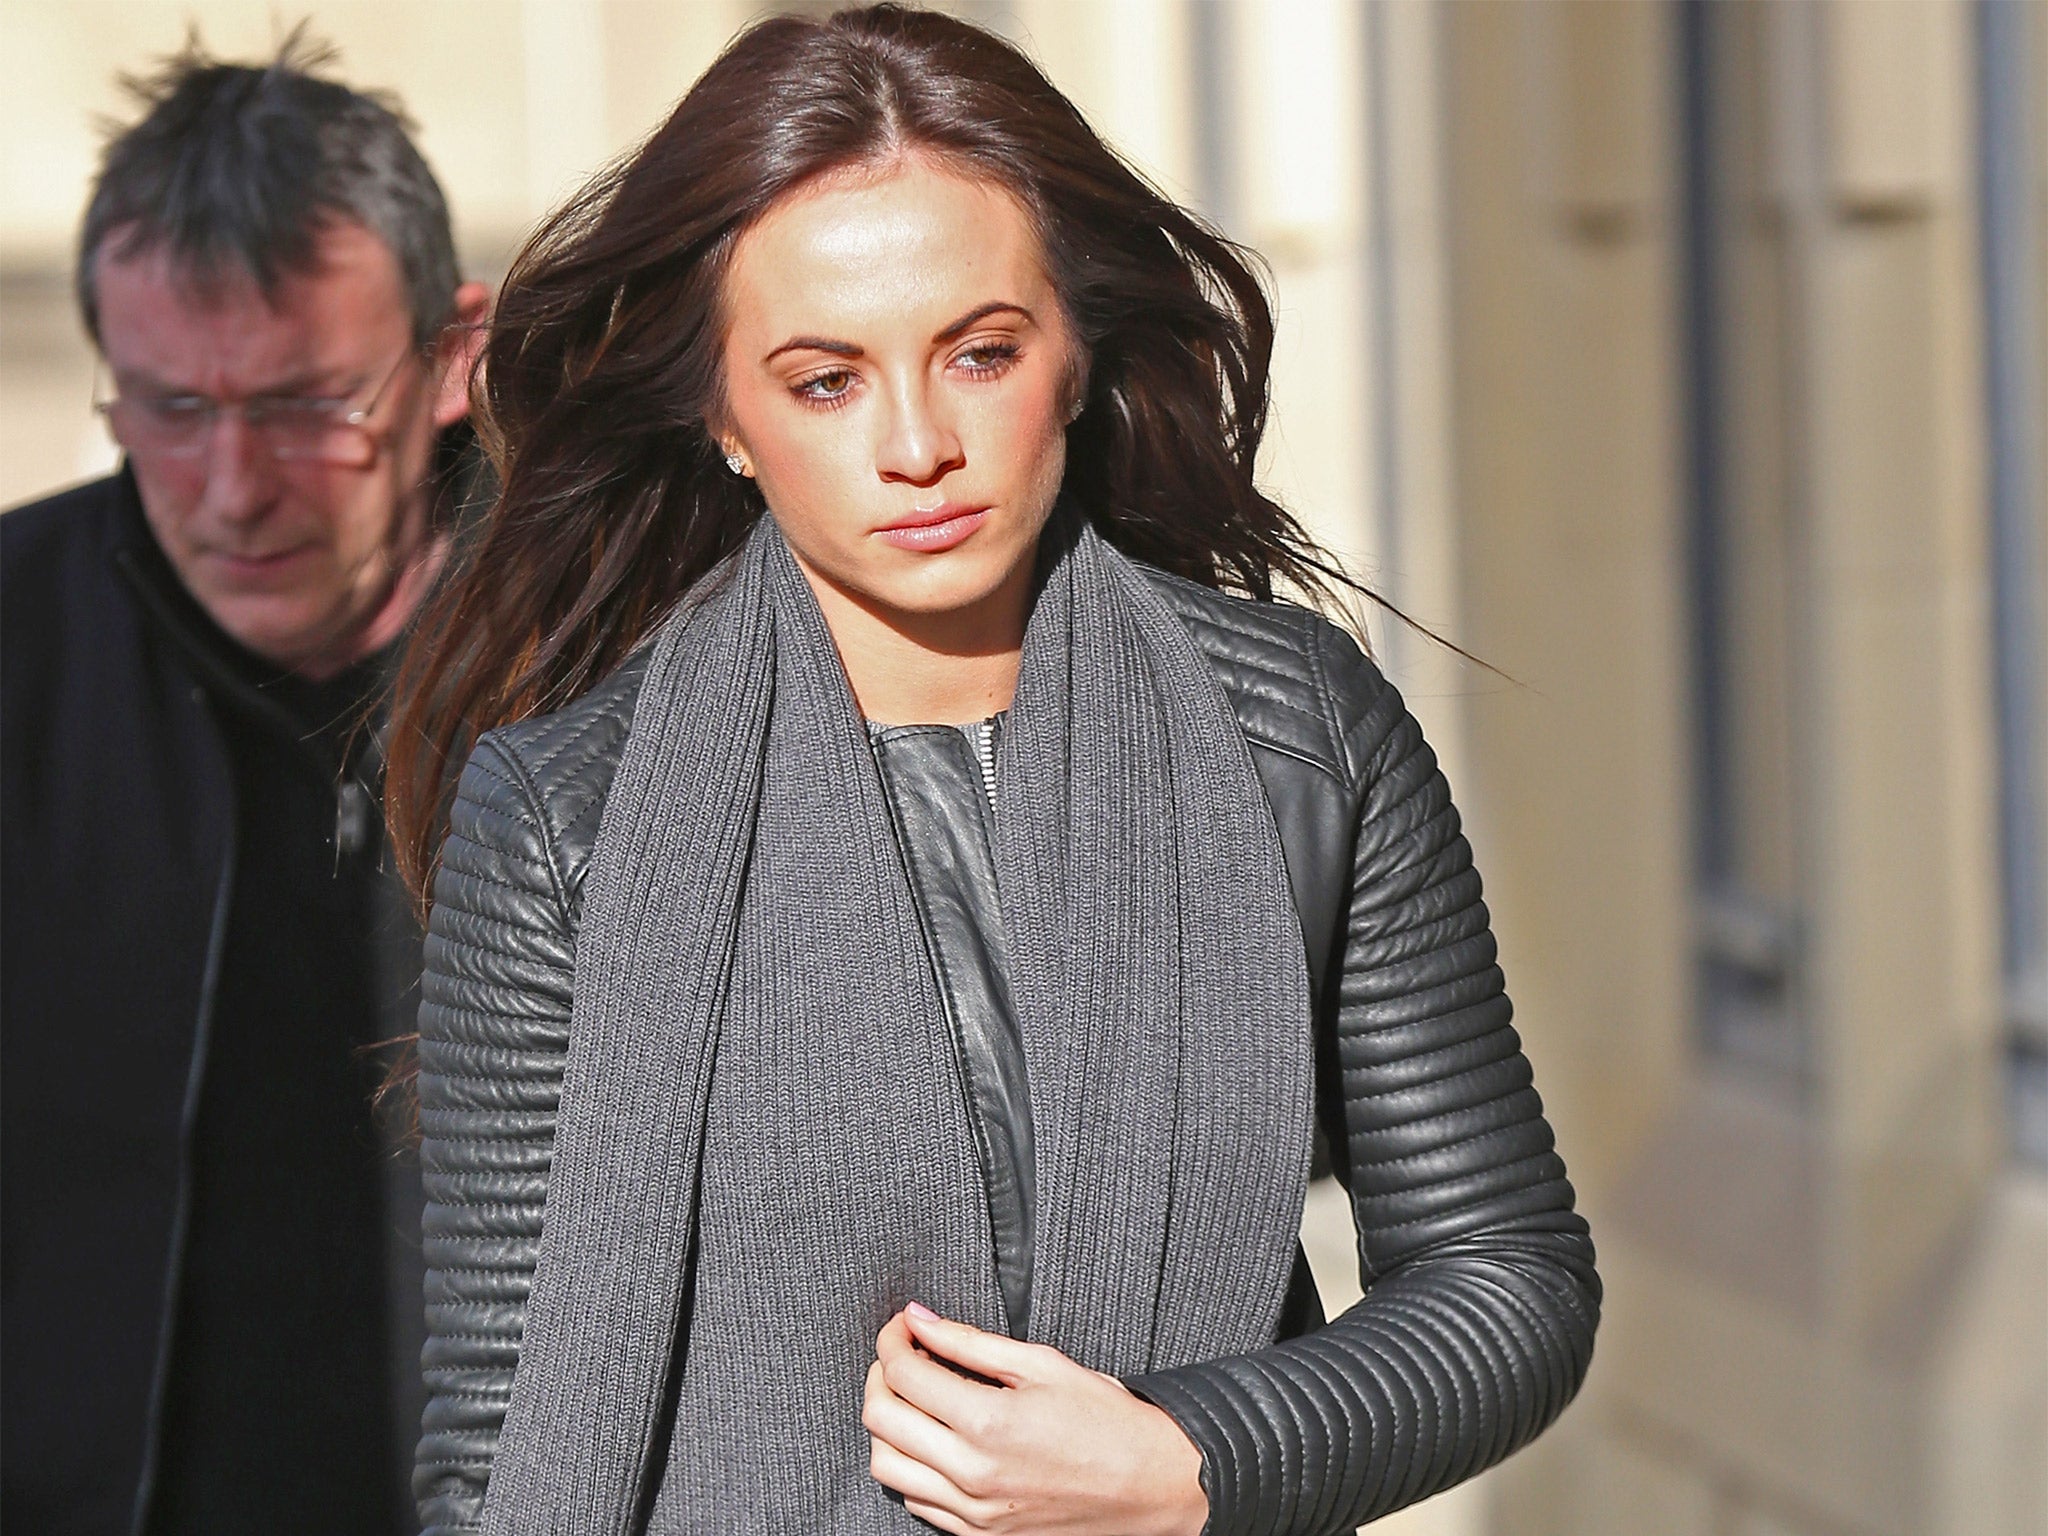 Stacey Flounders, the girlfriend of the former Sunderland player, arrives at Bradford Crown Court (Getty)